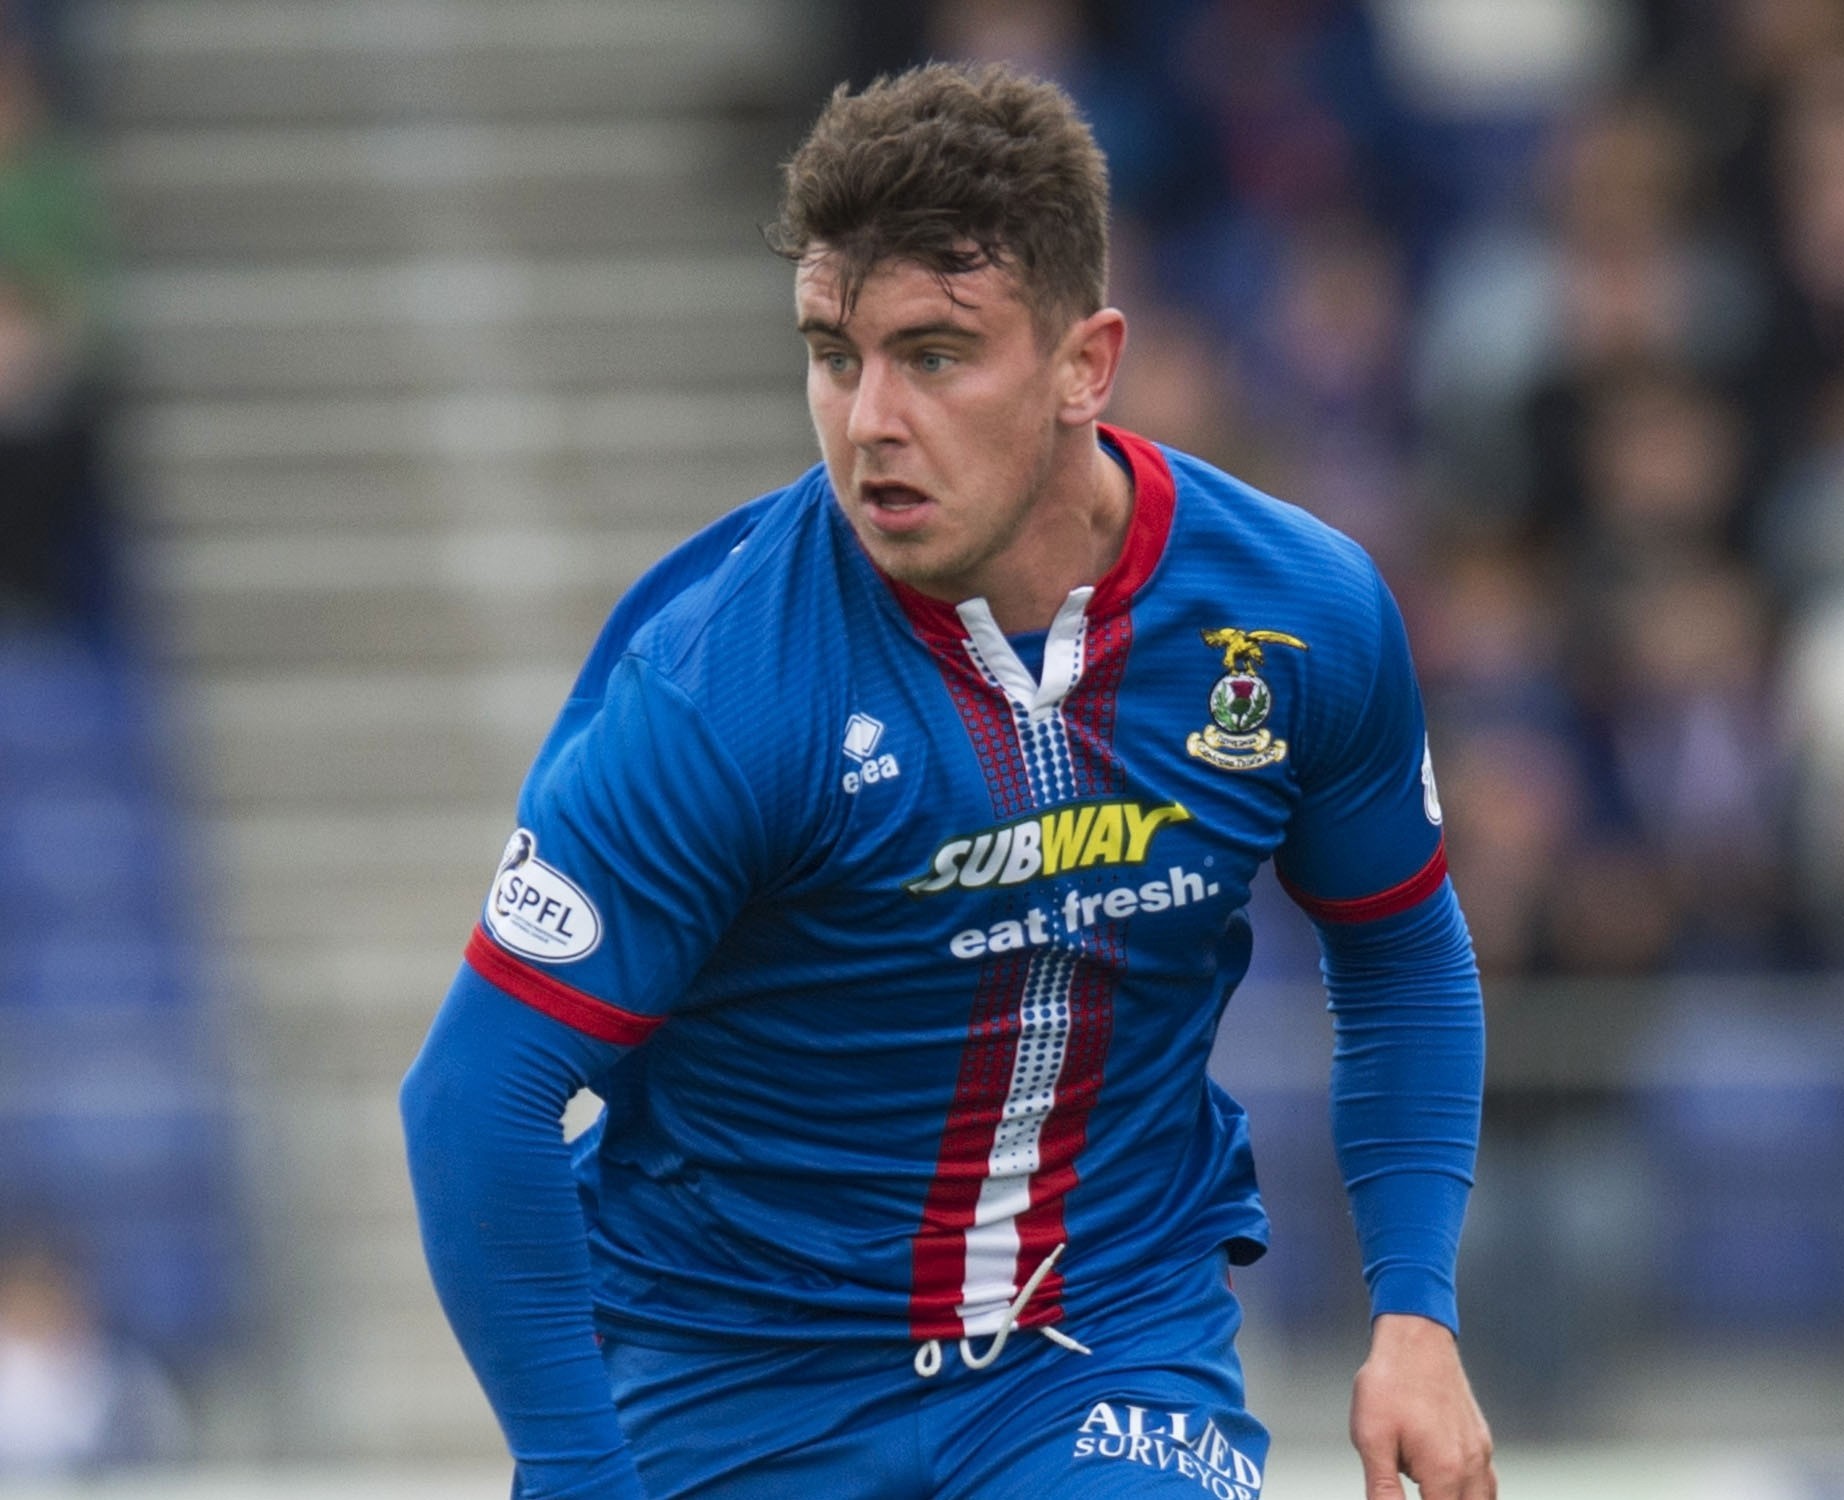 Doran has made over 100 appearances for Caley Thistle